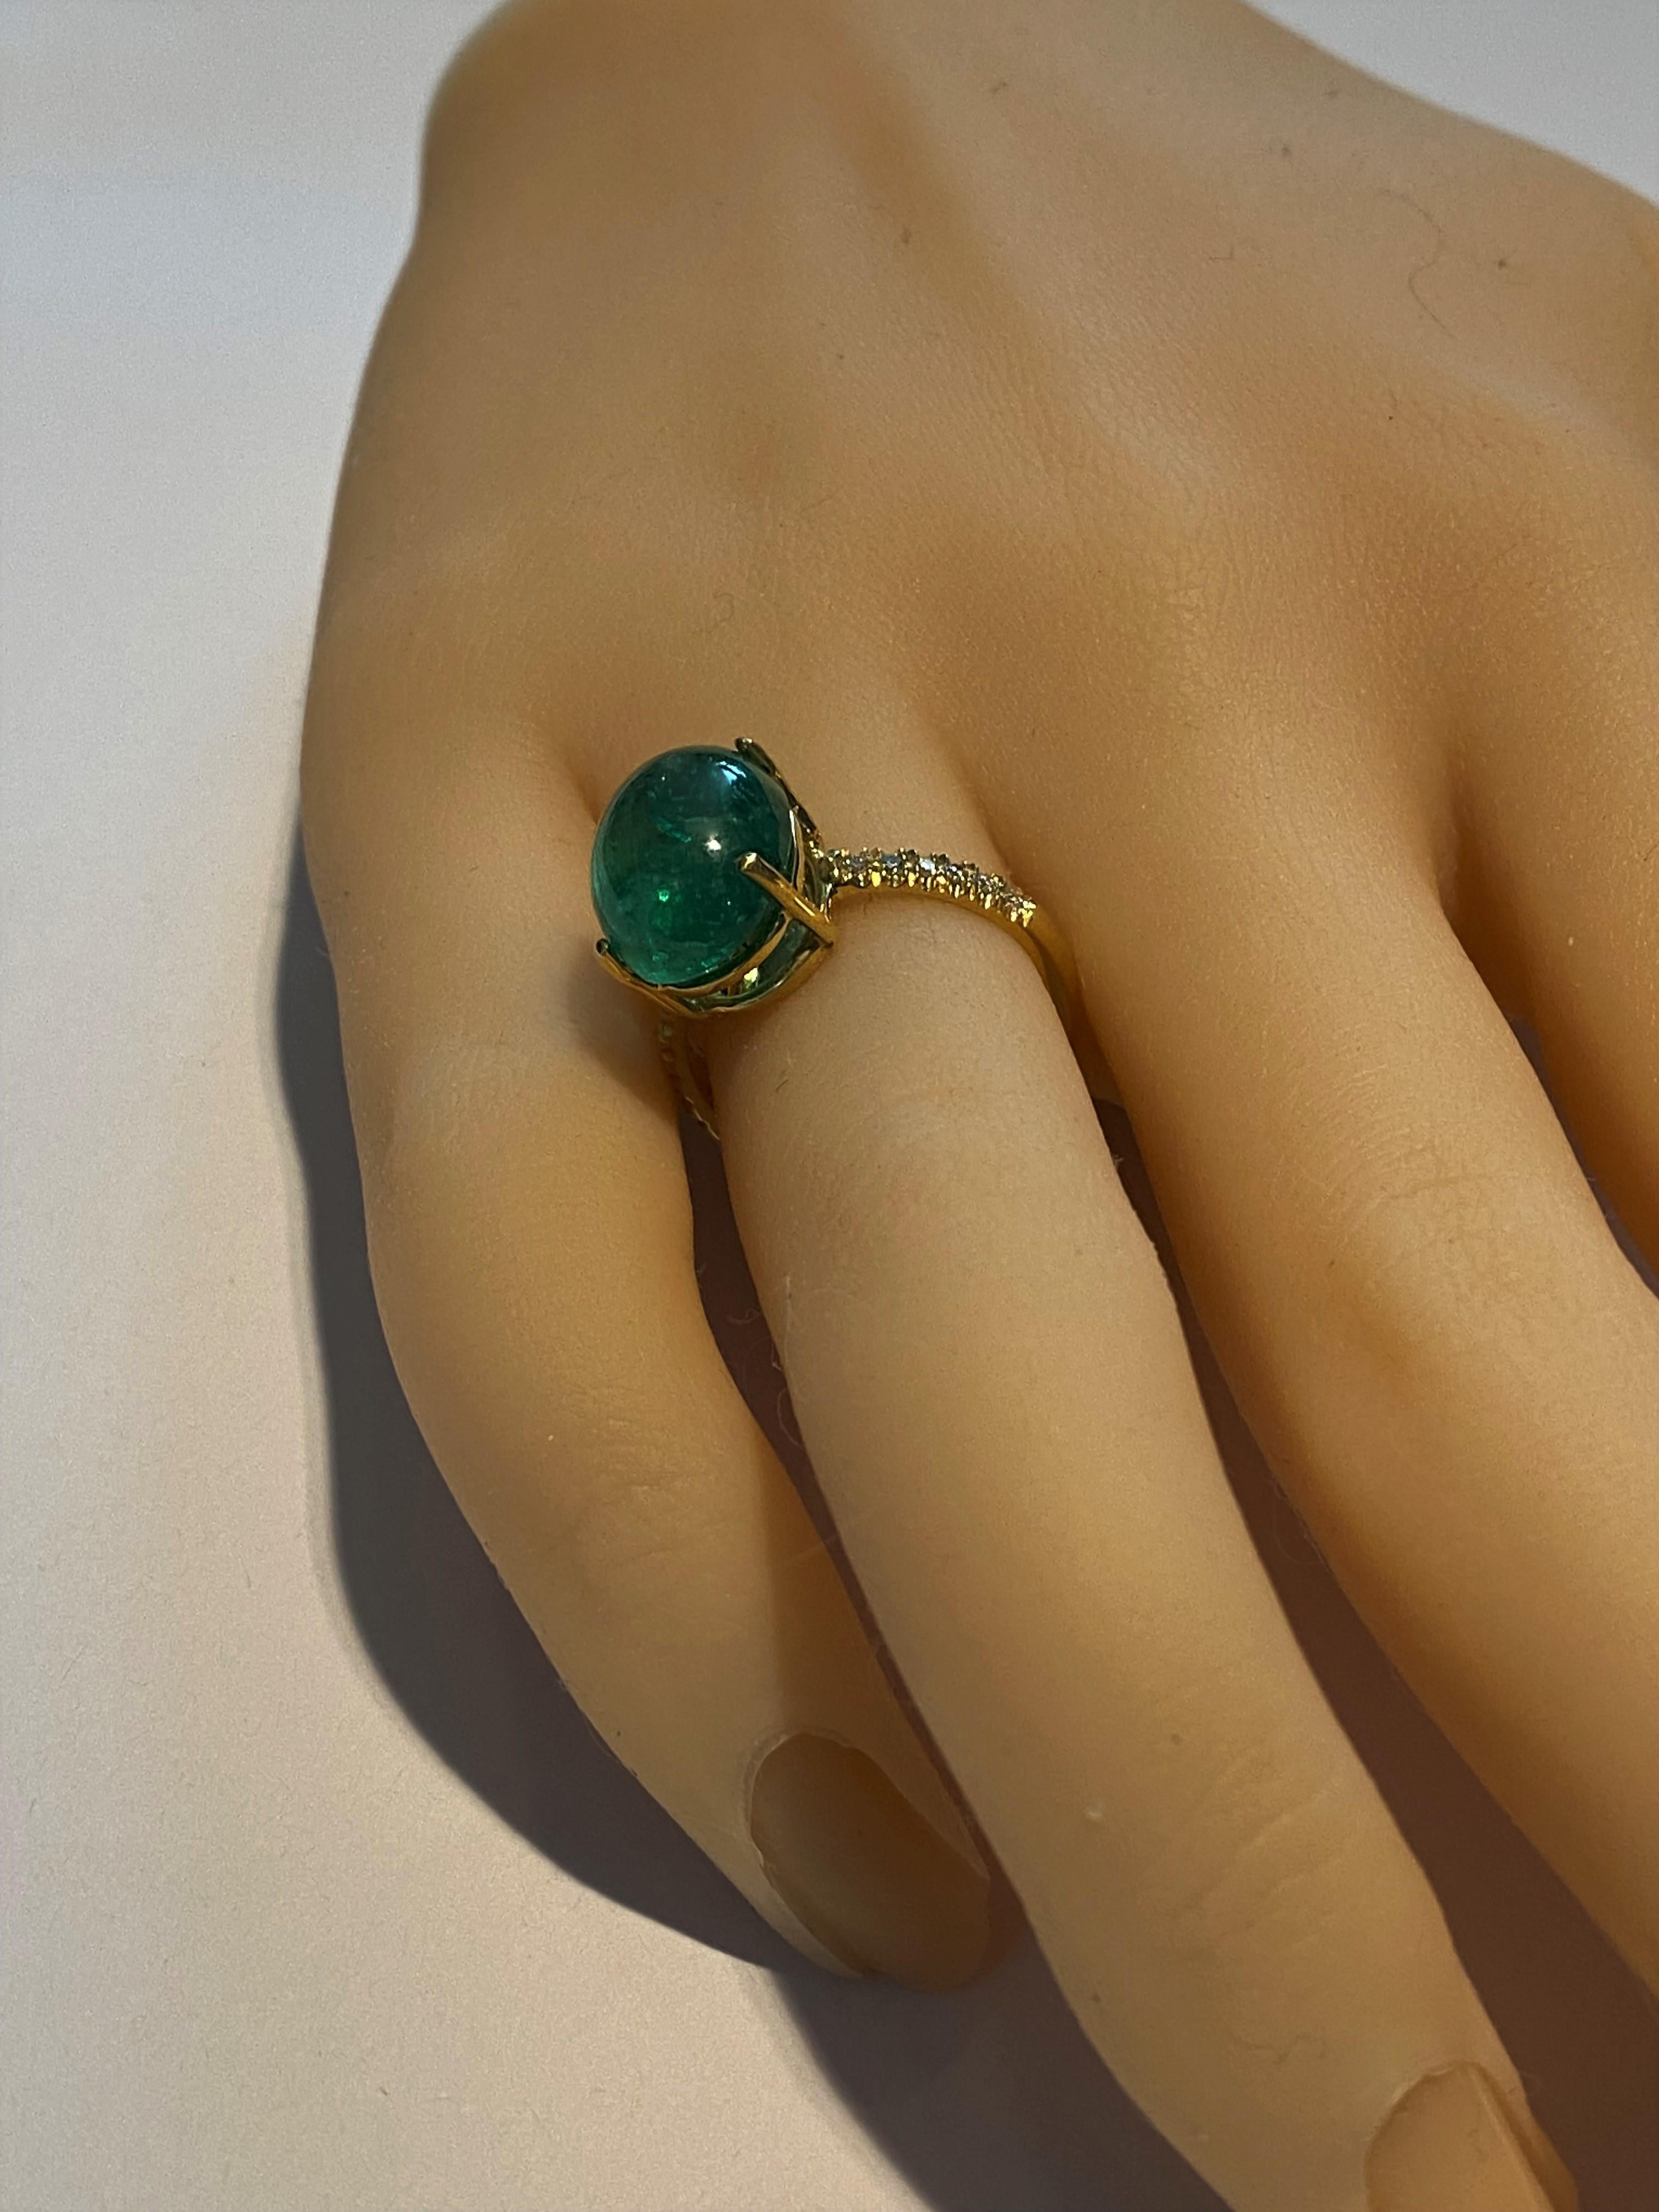 Oval Cut Cabochon Emerald and Diamonds Yellow Gold Cocktail Ring Weighing 7.05 Carat